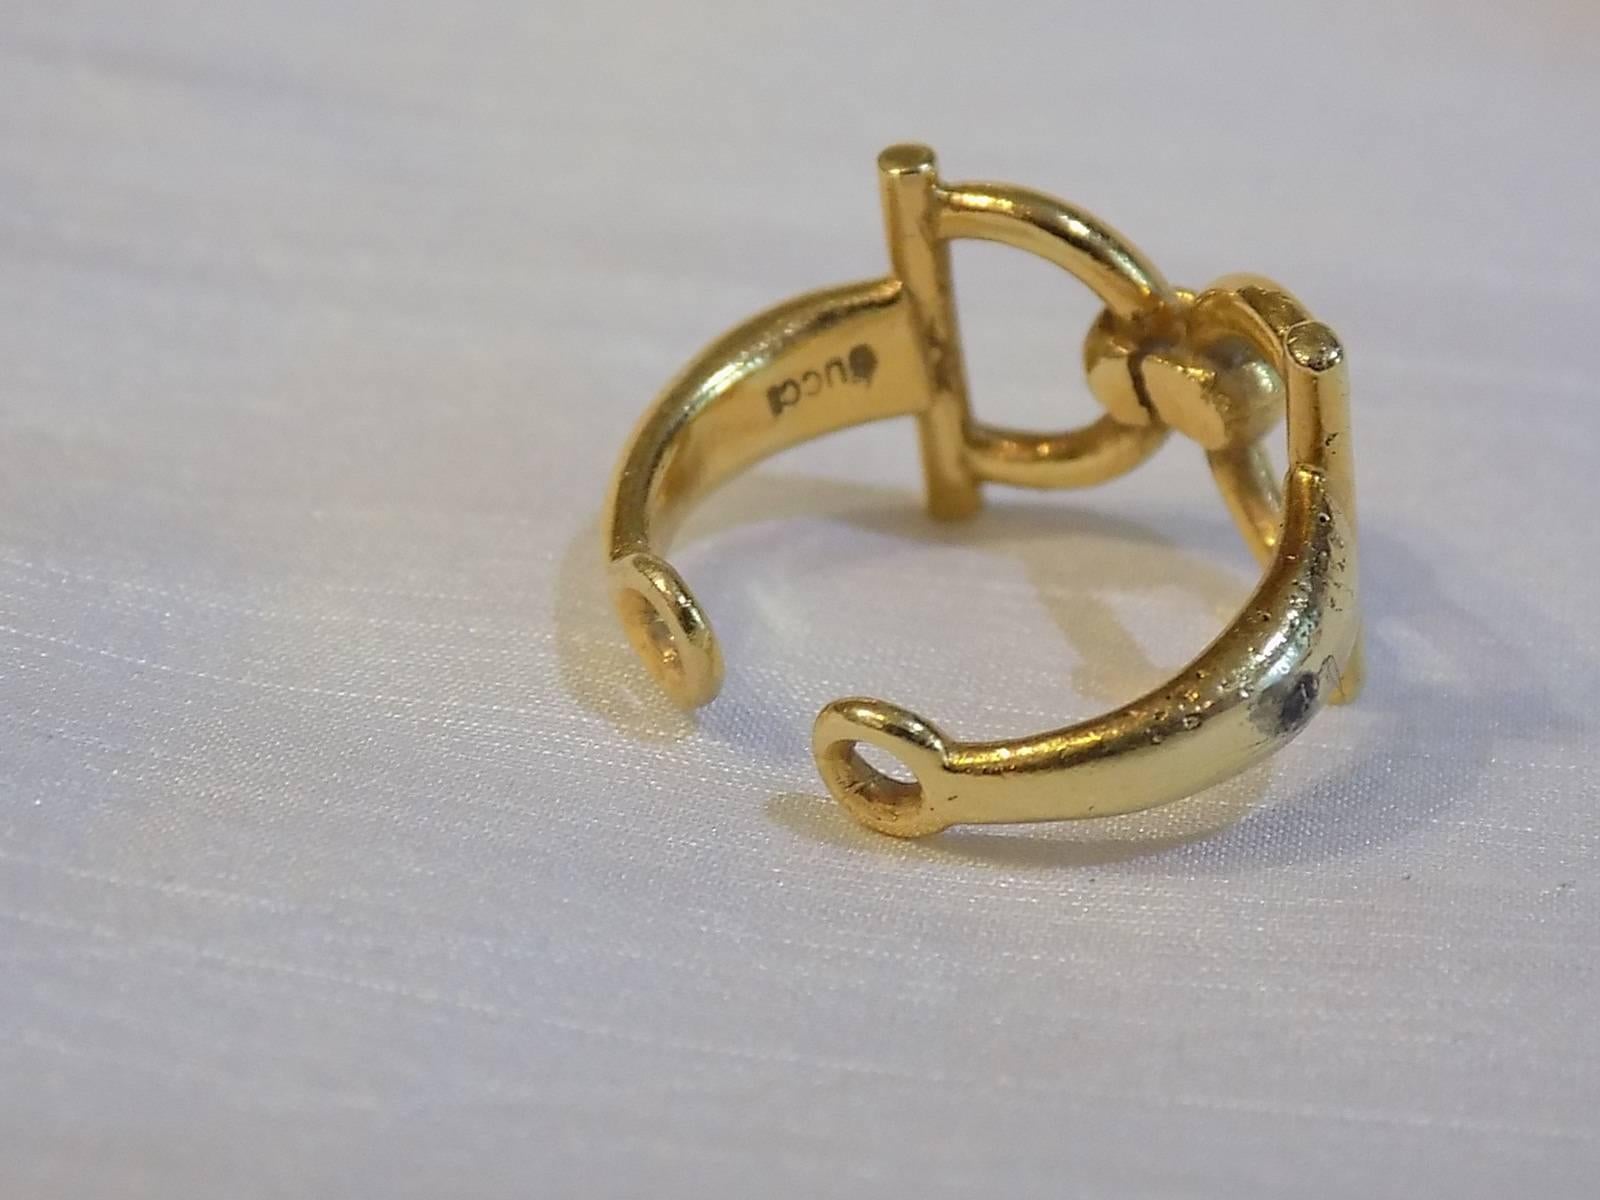  Vintage Gucci Horsebit Gold Open Ring   For Sale 1